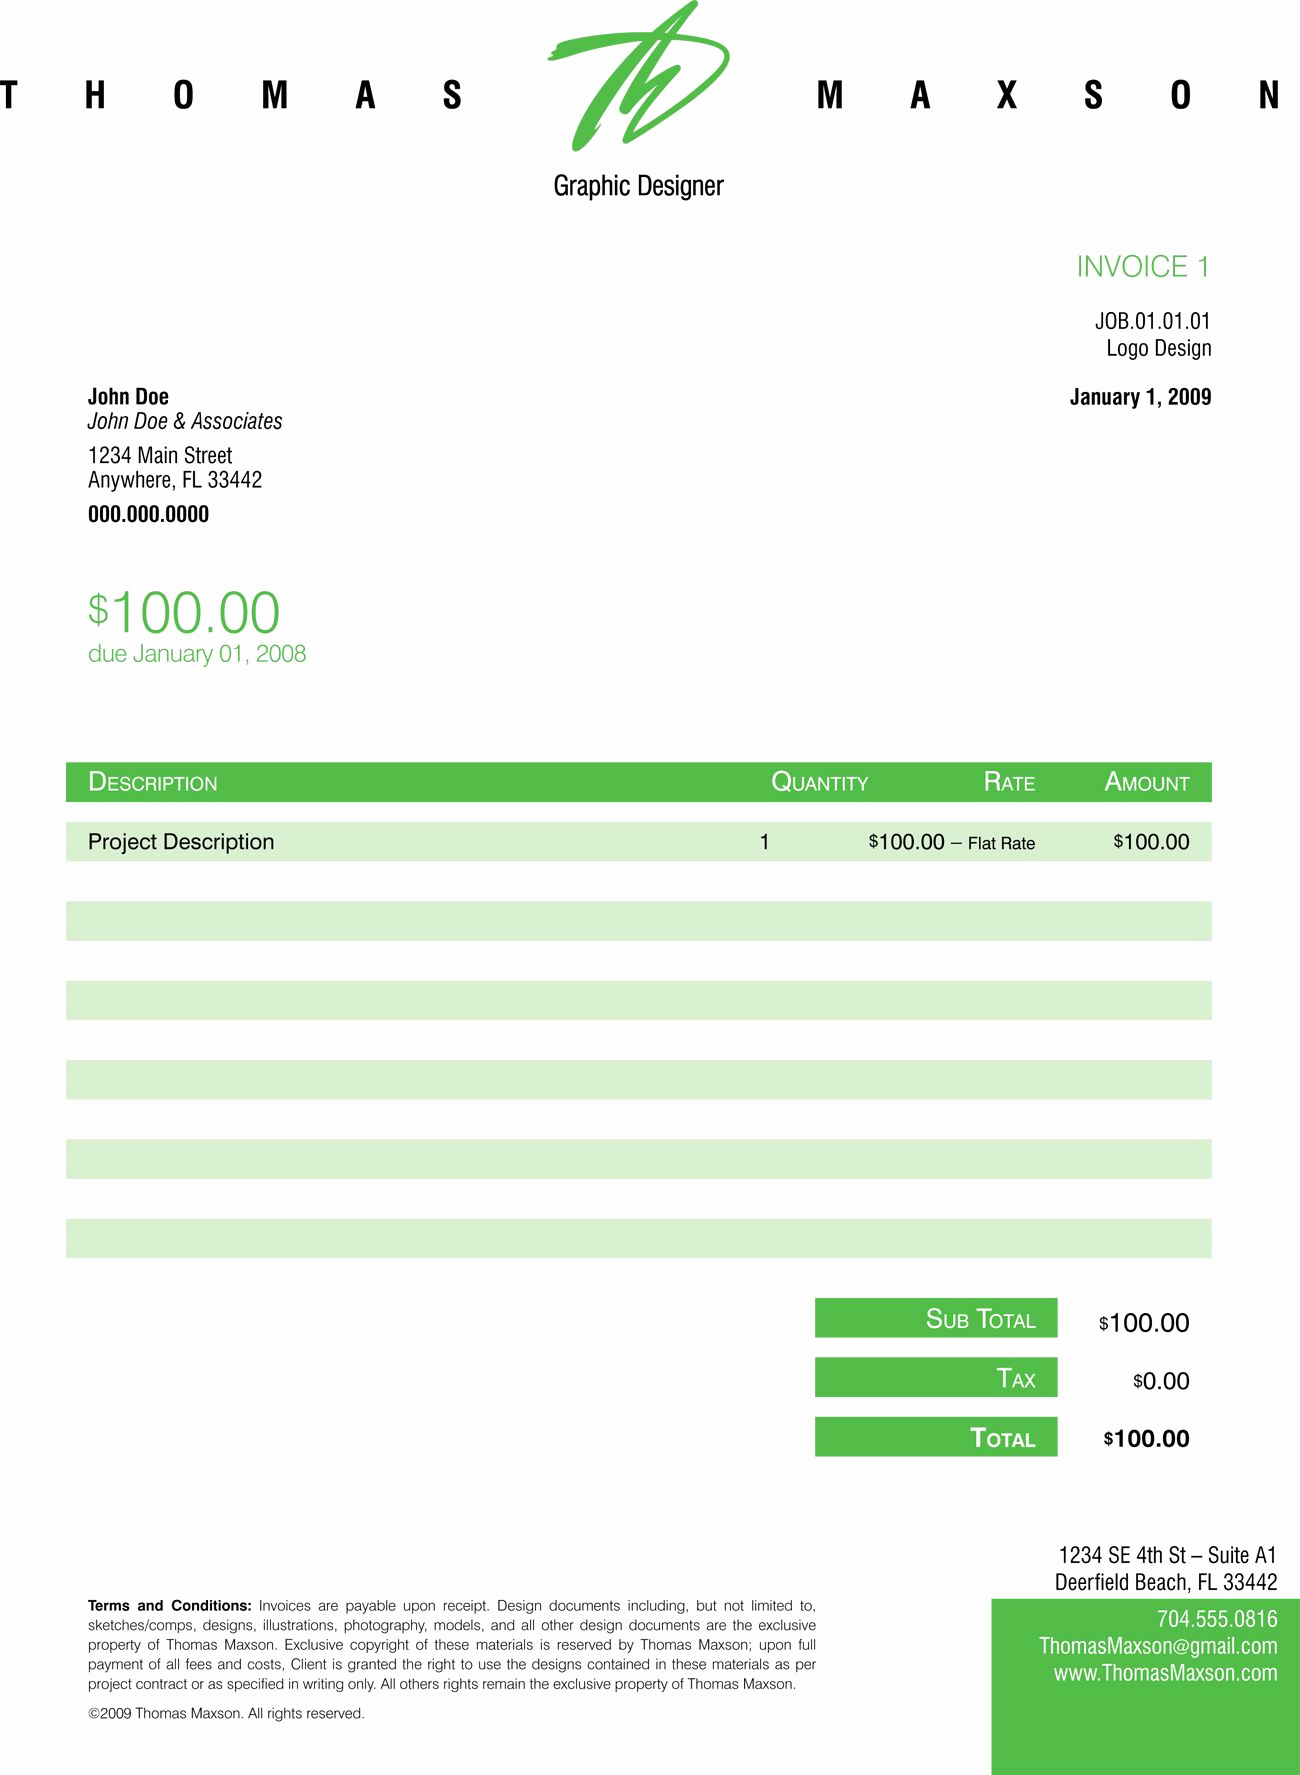 Freelance Graphic Design Invoice Template Fresh Invoice Like A Pro Design Examples and Best Practices